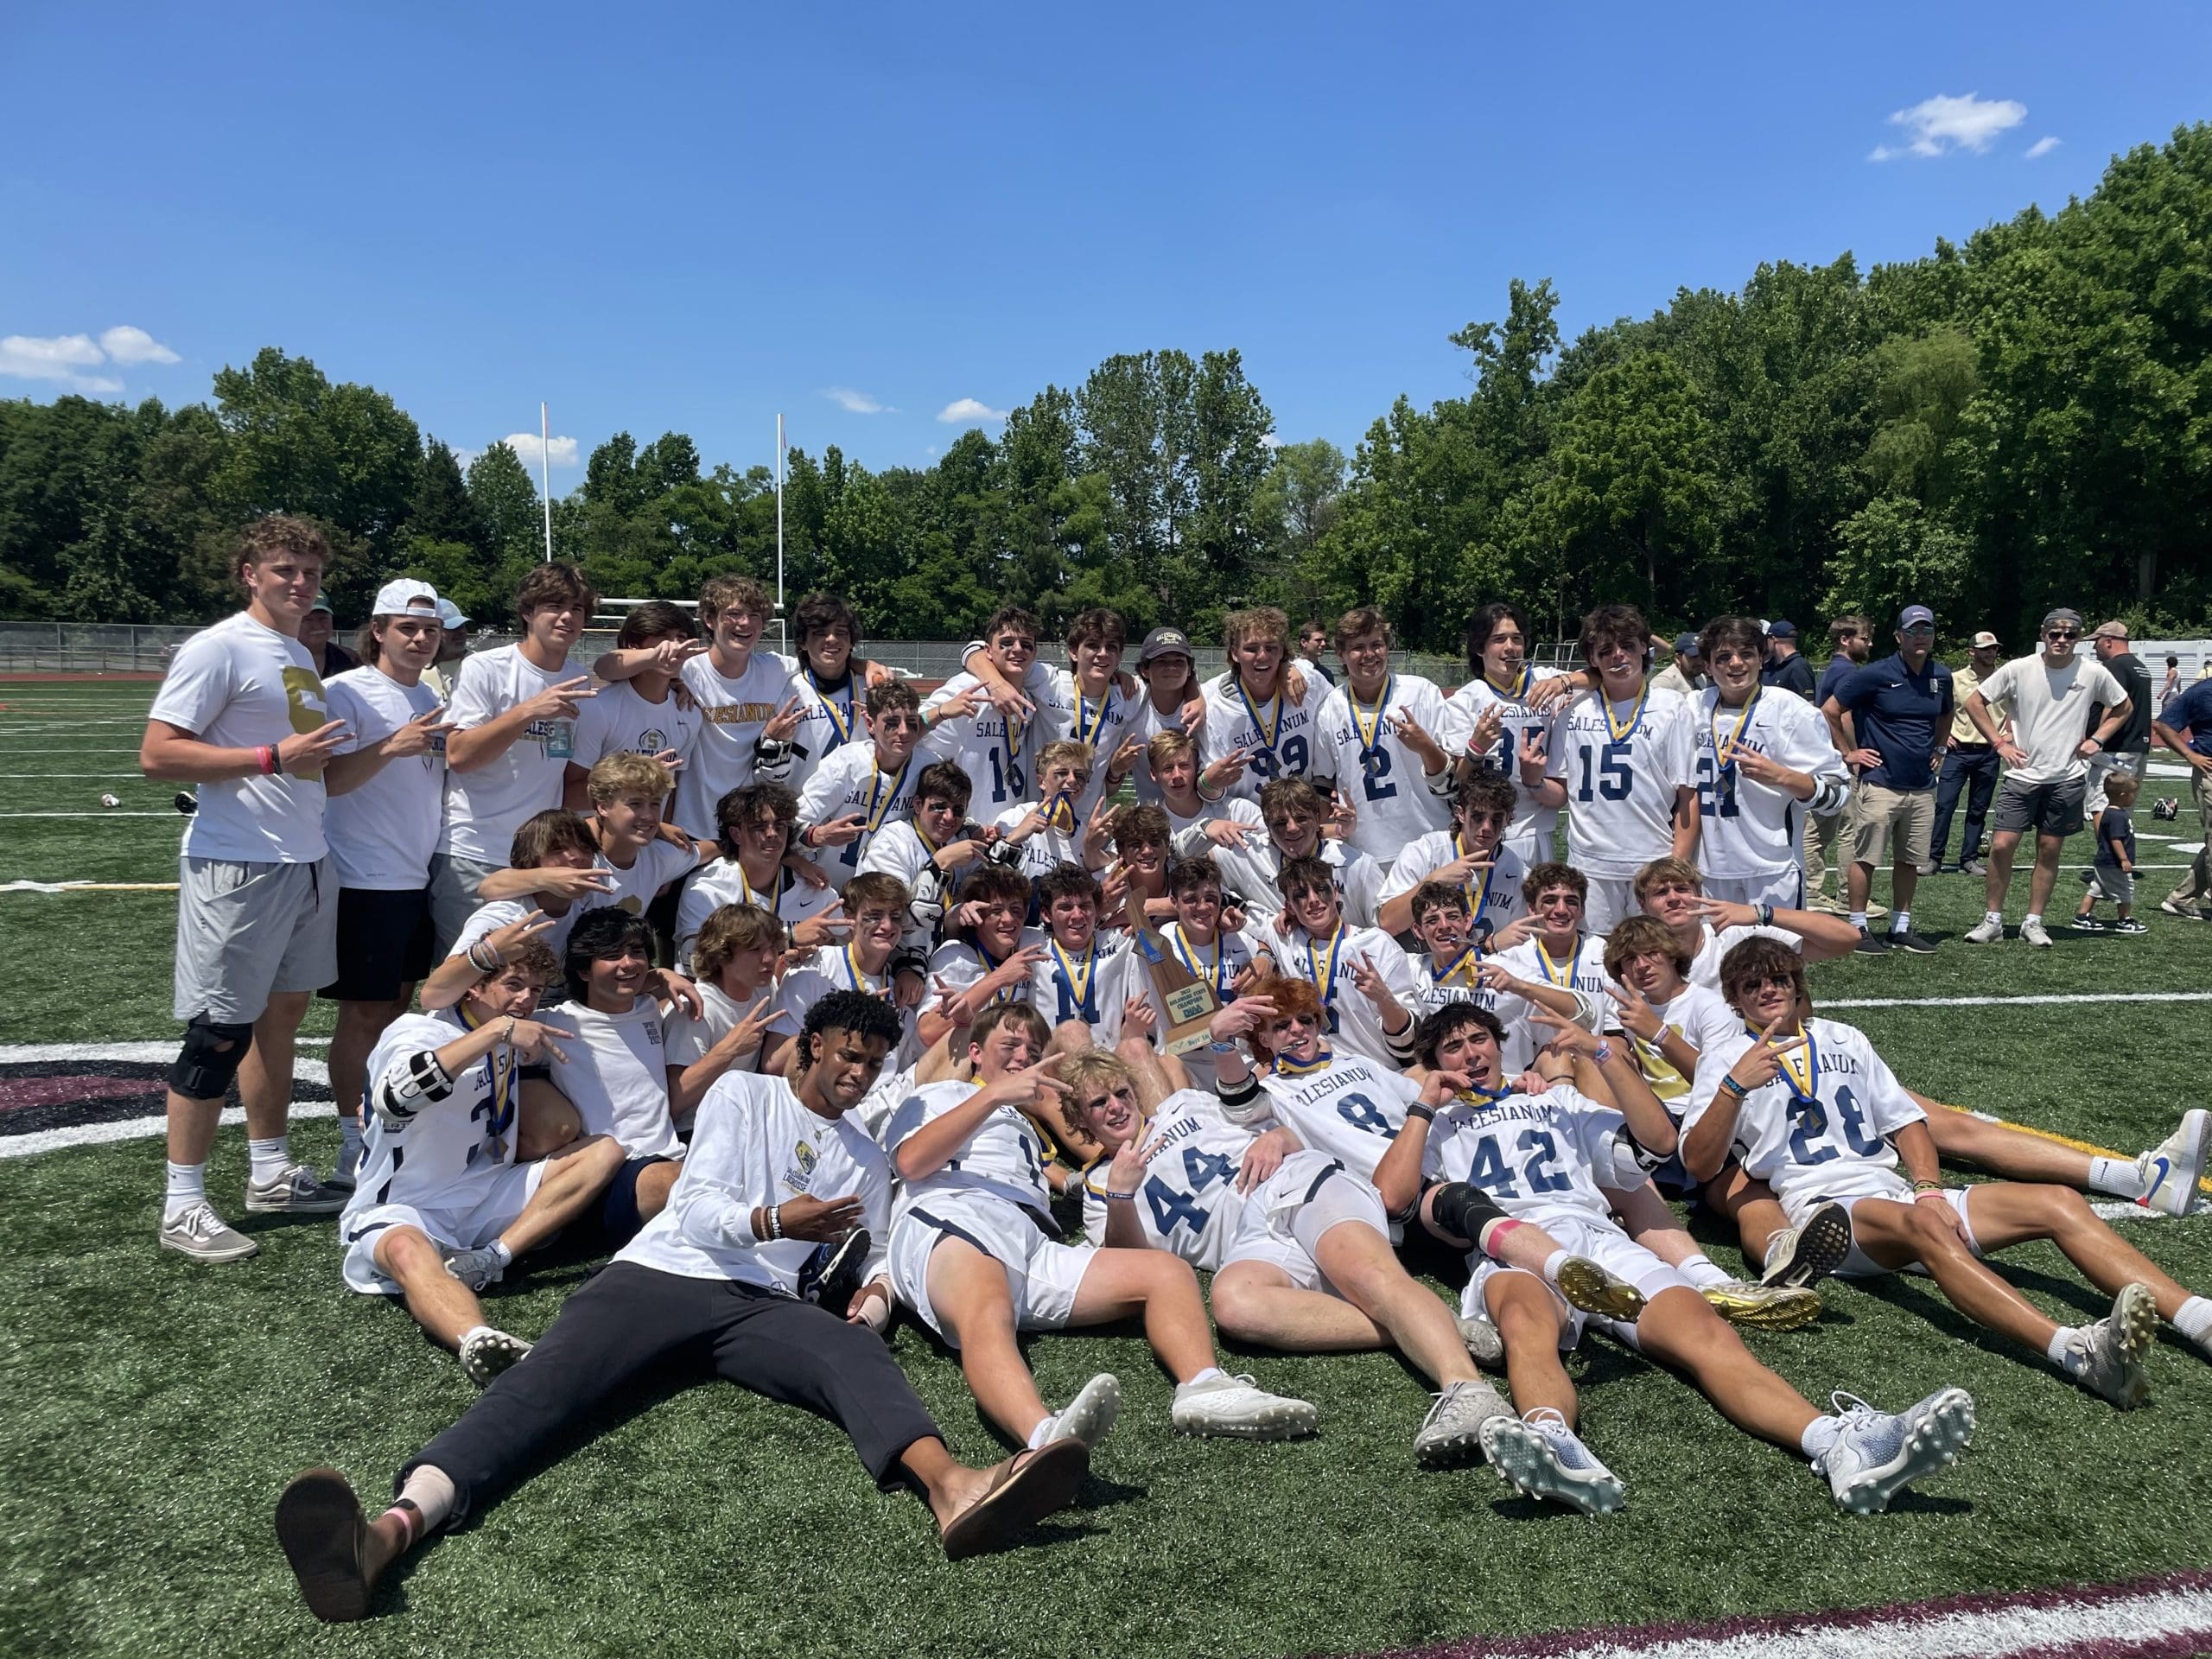 Featured image for “Sallies win back to back lacrosse state championships ”